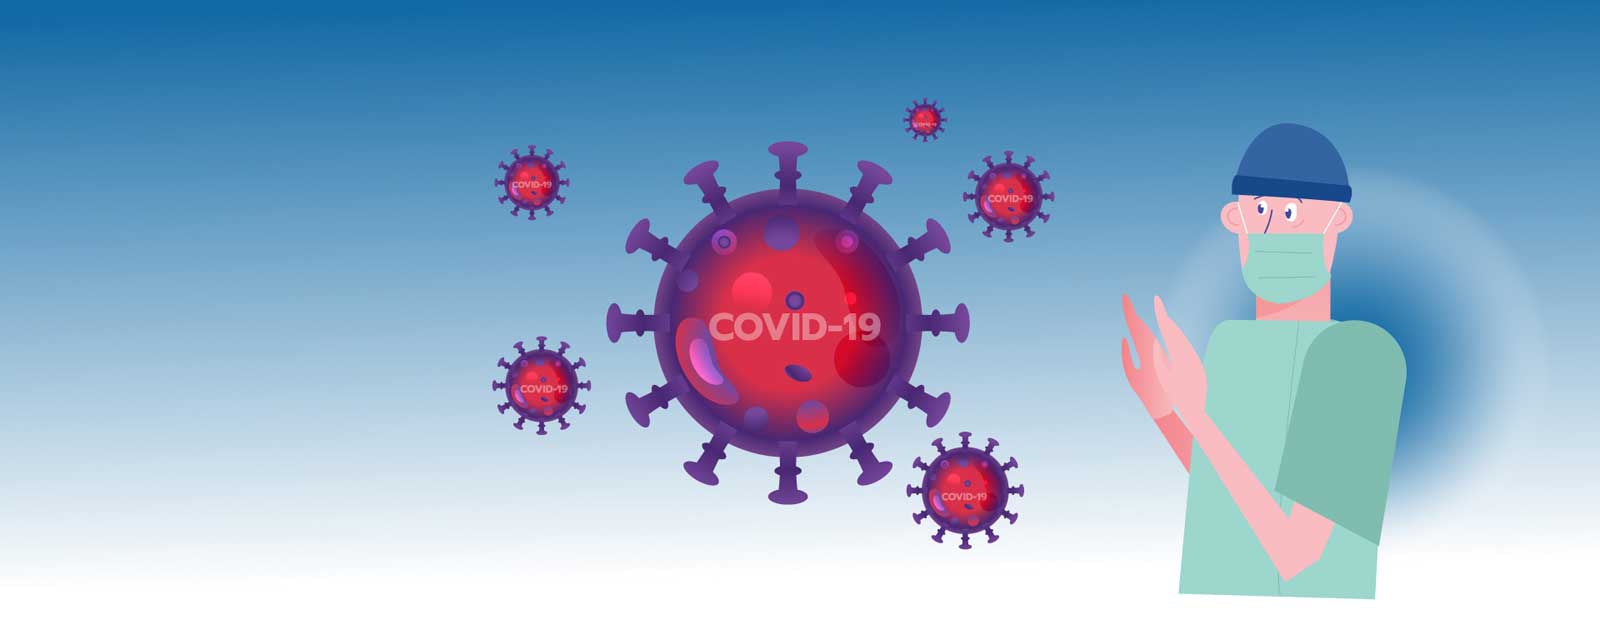 Measures taken to prevent the spread of covid-19